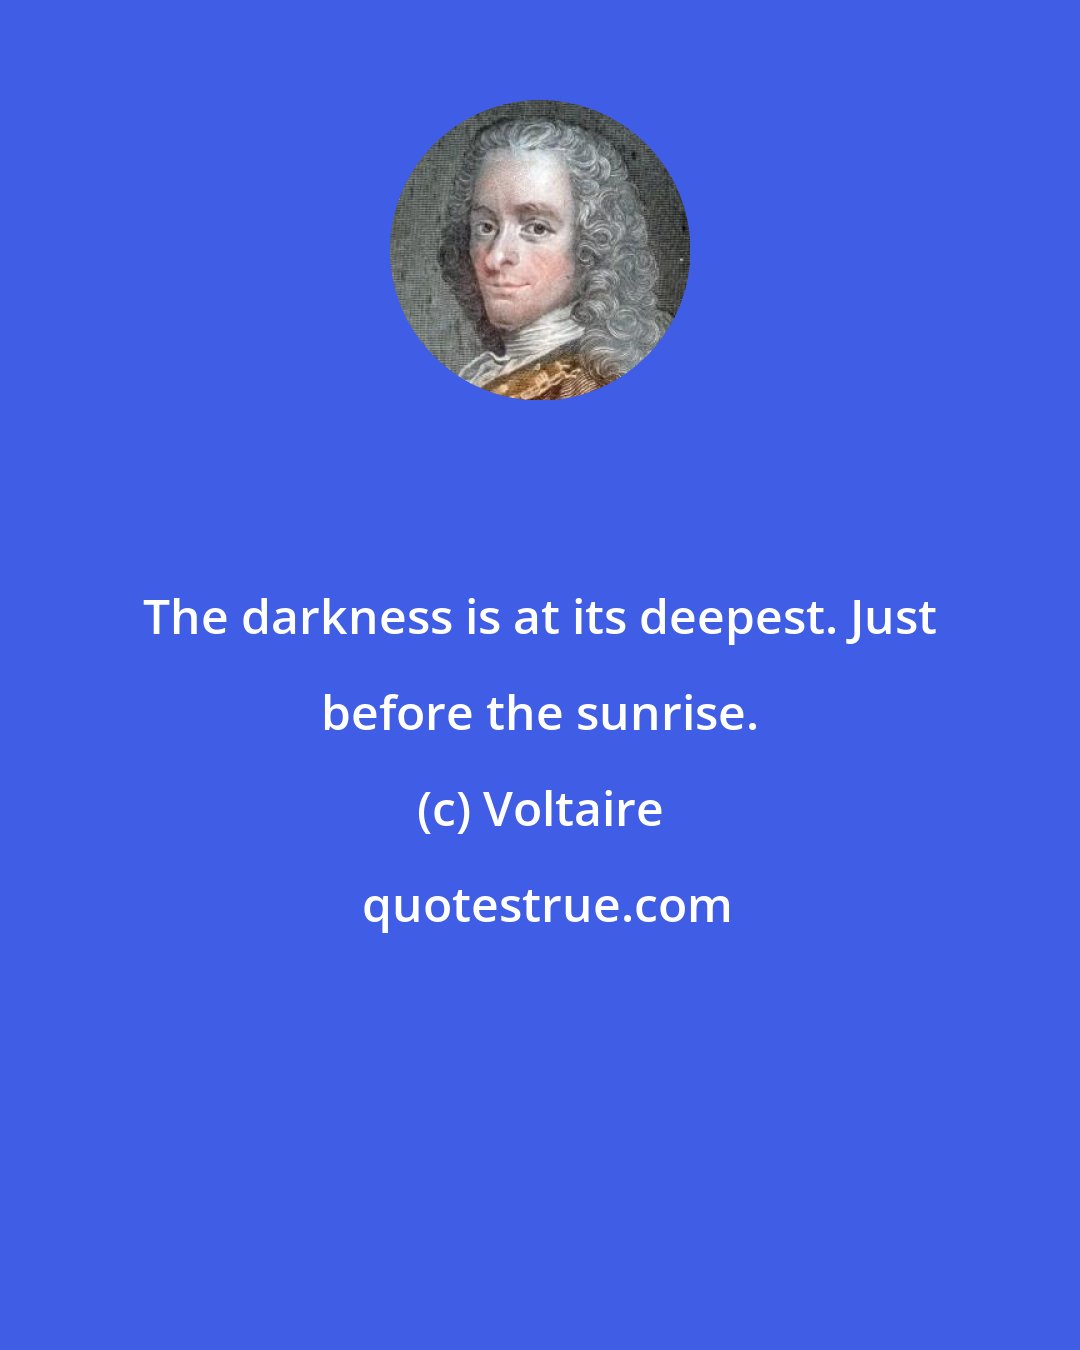 Voltaire: The darkness is at its deepest. Just before the sunrise.